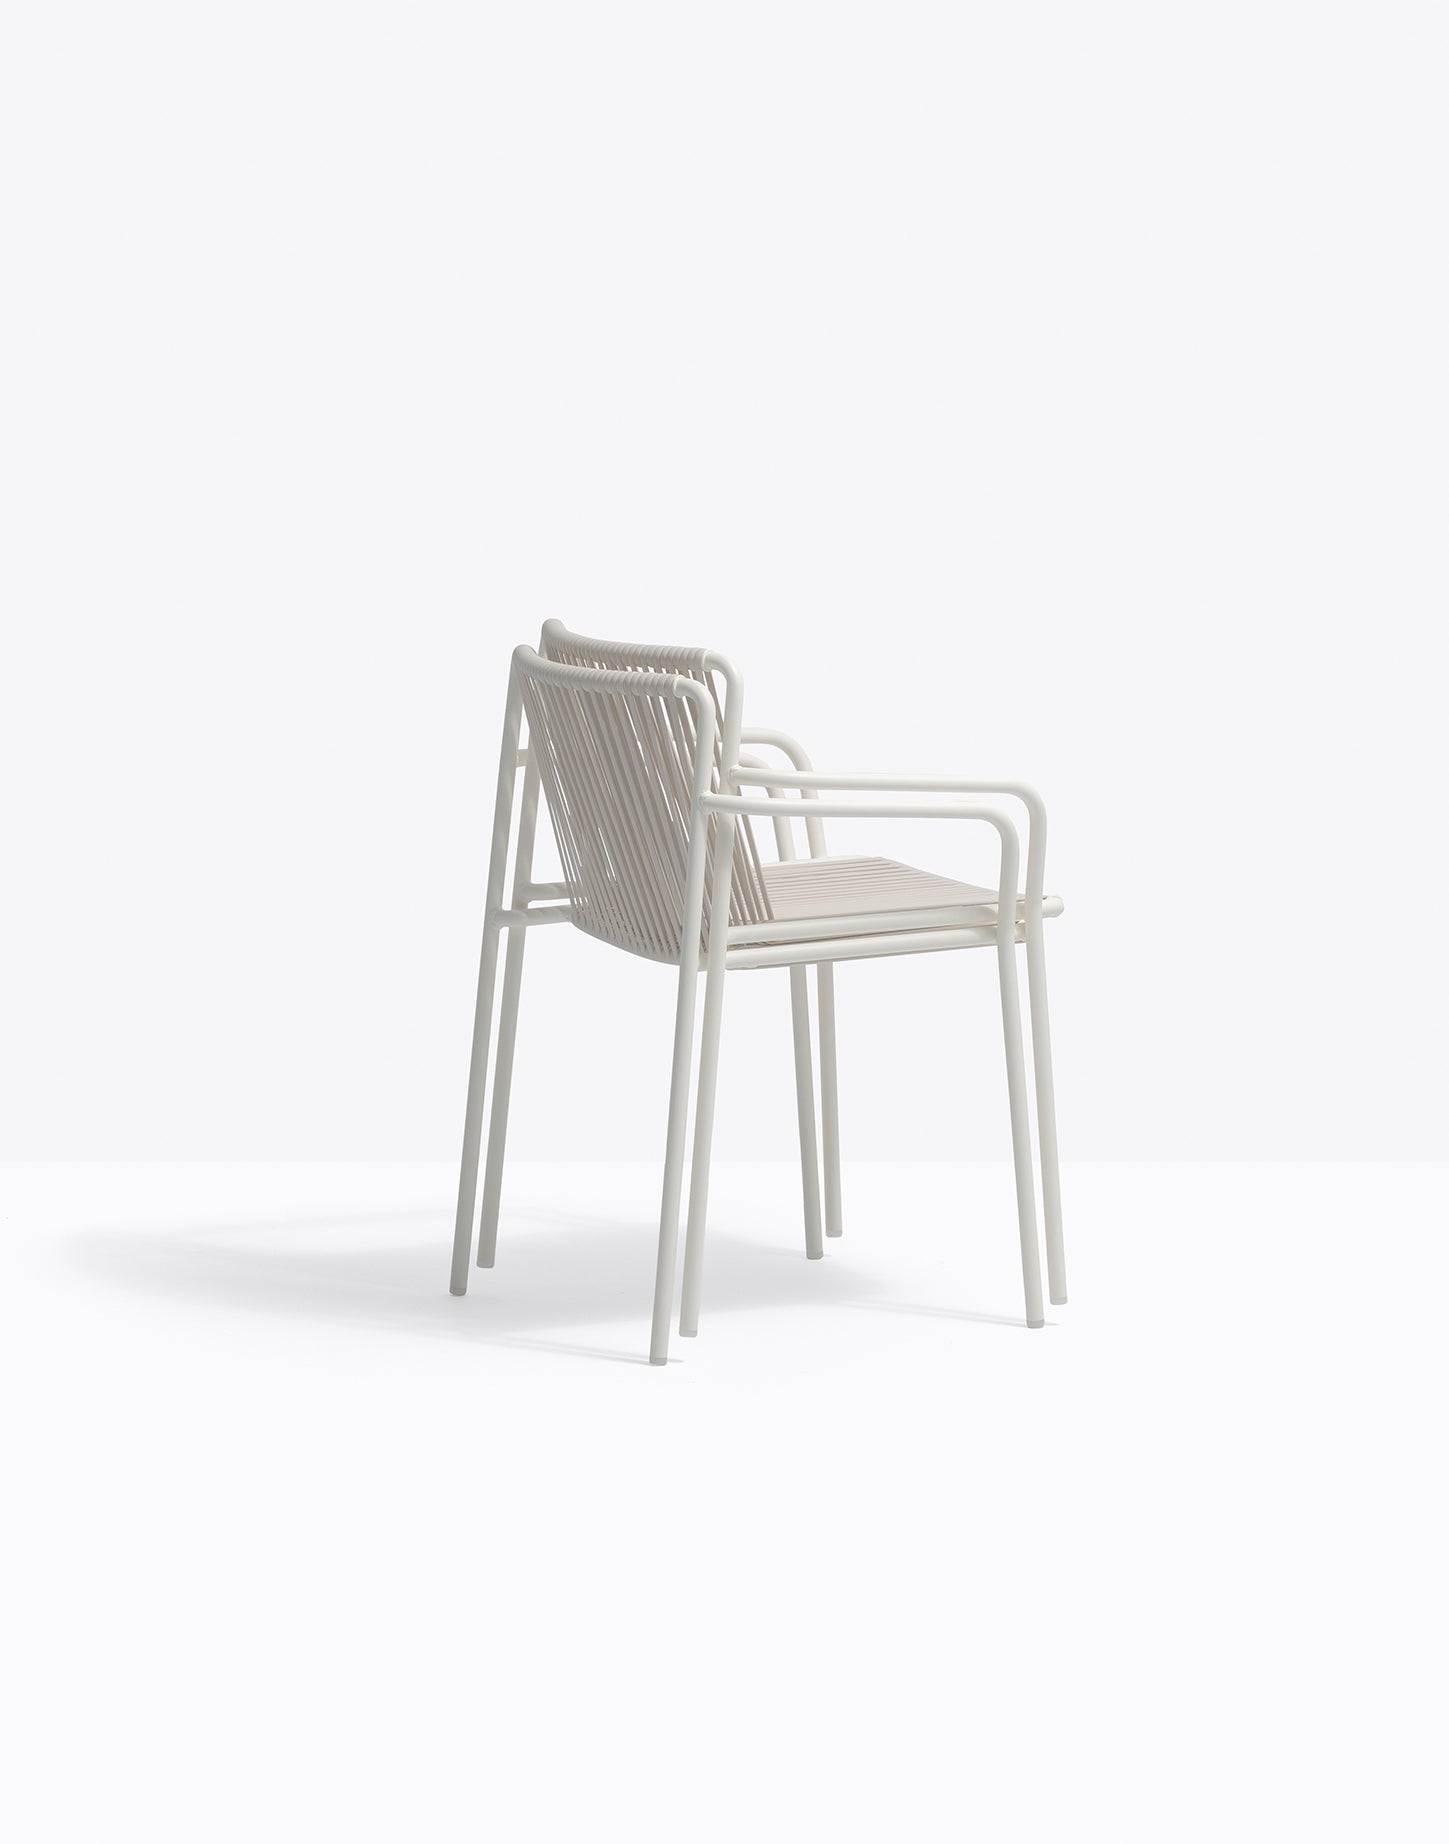 Pedrali Tribeca 3660 Outdoor Chair